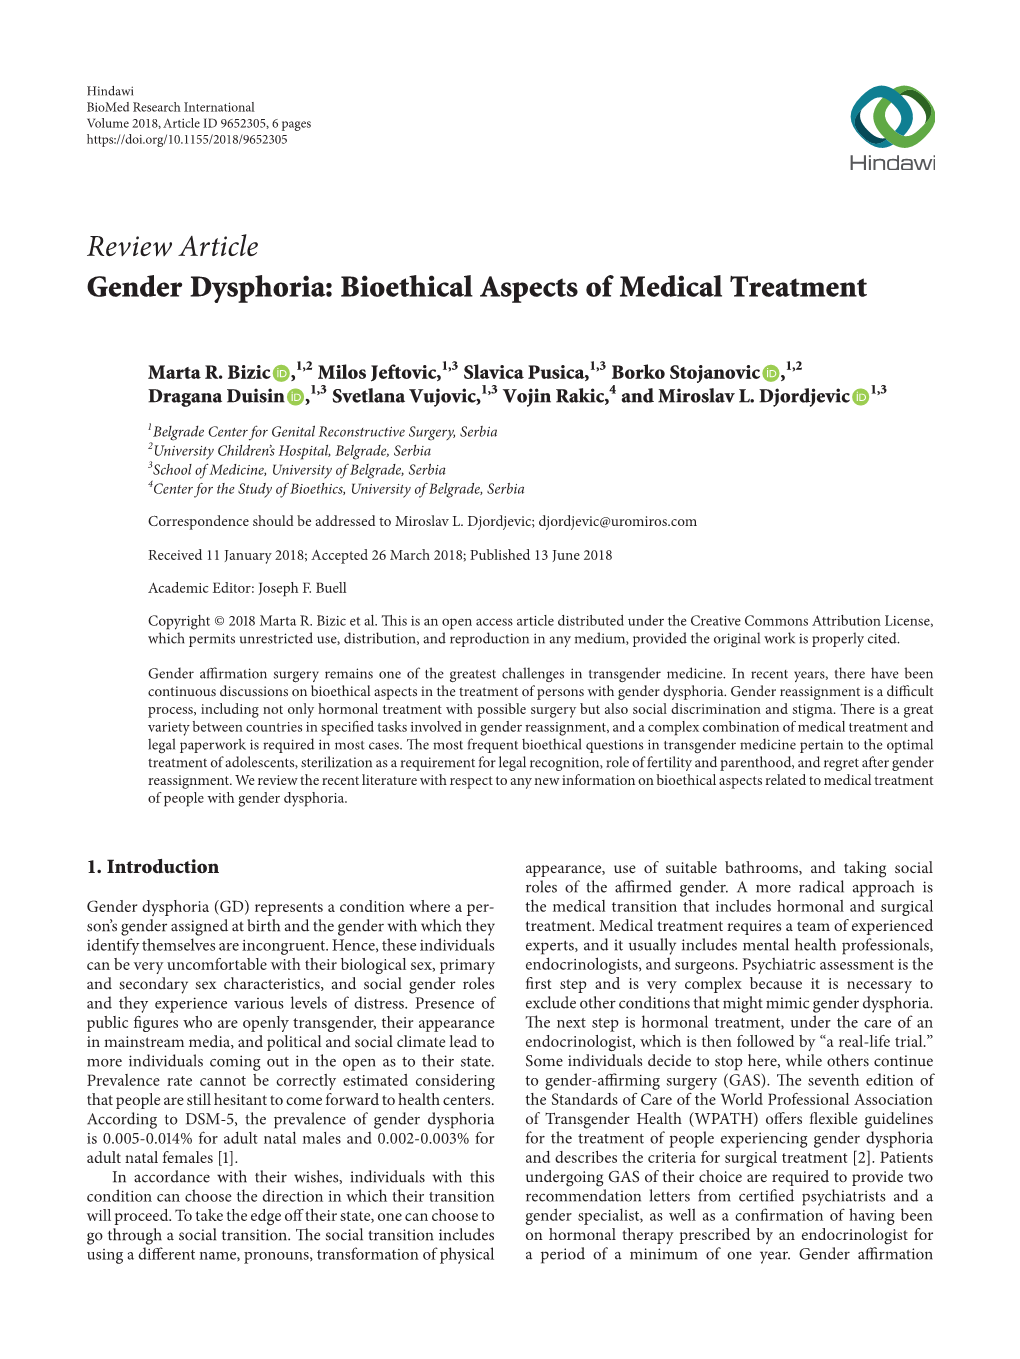 Review Article Gender Dysphoria: Bioethical Aspects of Medical Treatment